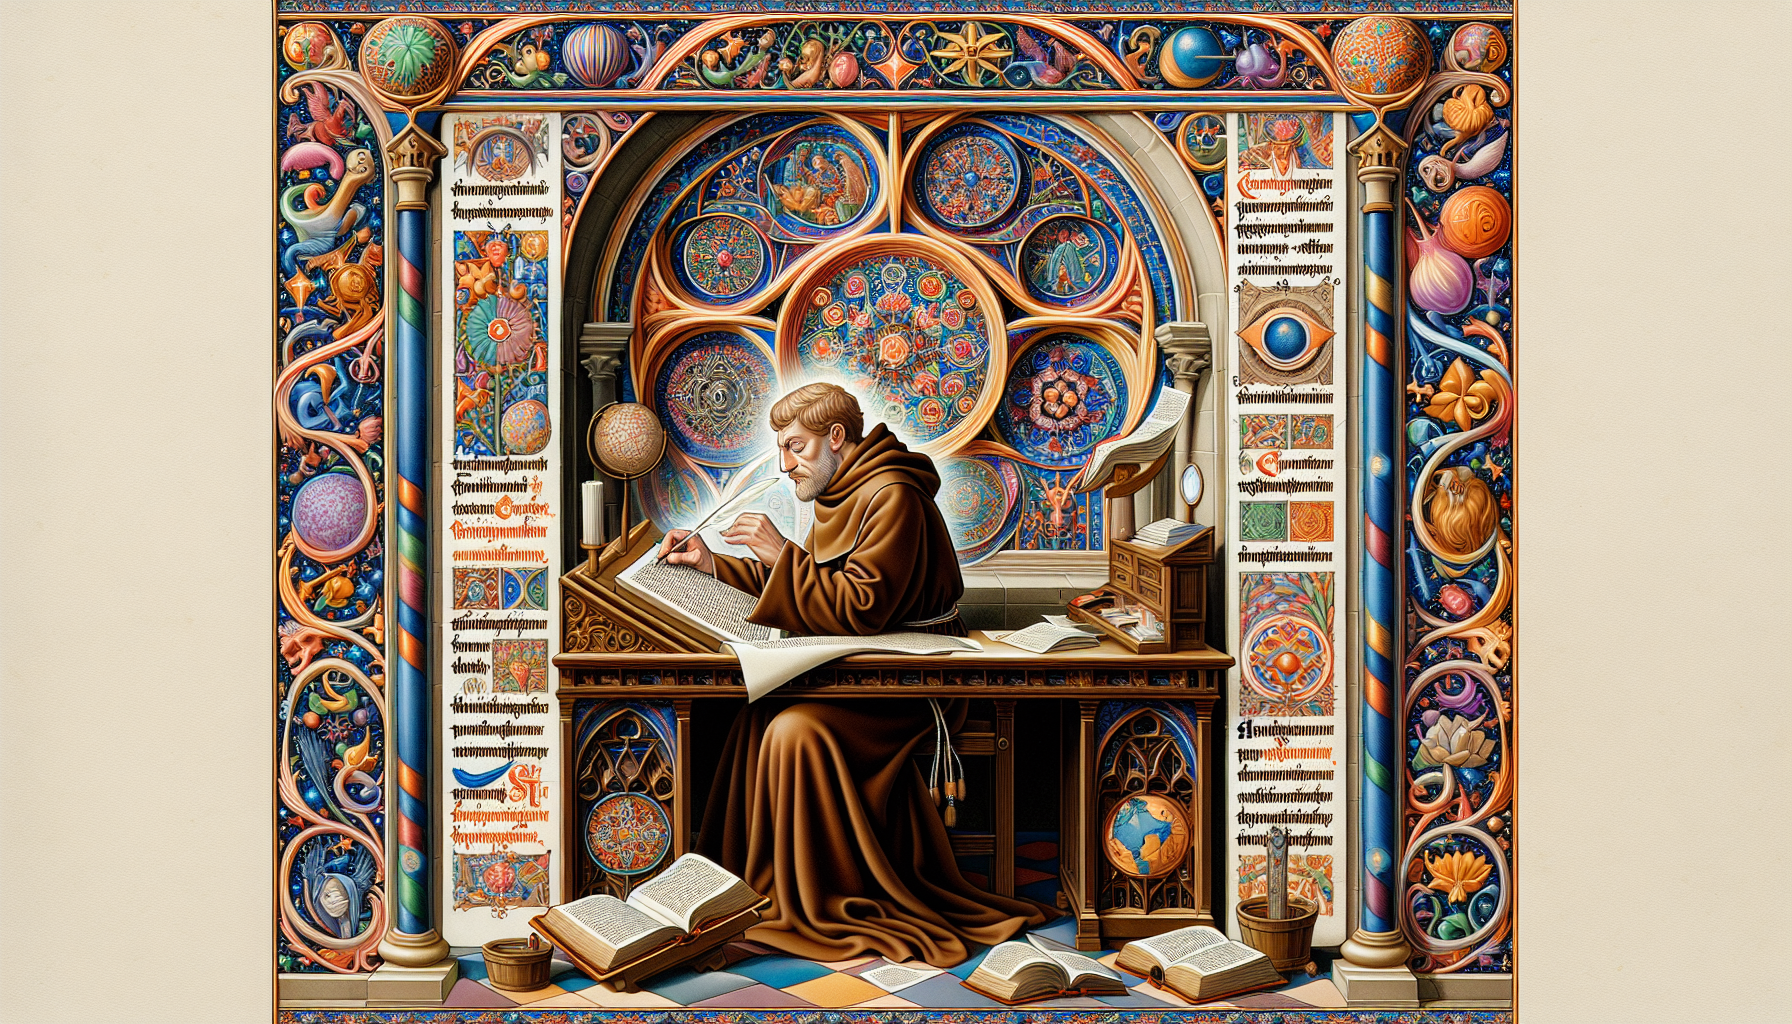 An illuminated manuscript page showing a medieval monk in a serene scriptorium, delicately transcribing the Bible verse 1 Timothy 1:6-11 with ornate decorations and vivid illustrations surrounding the